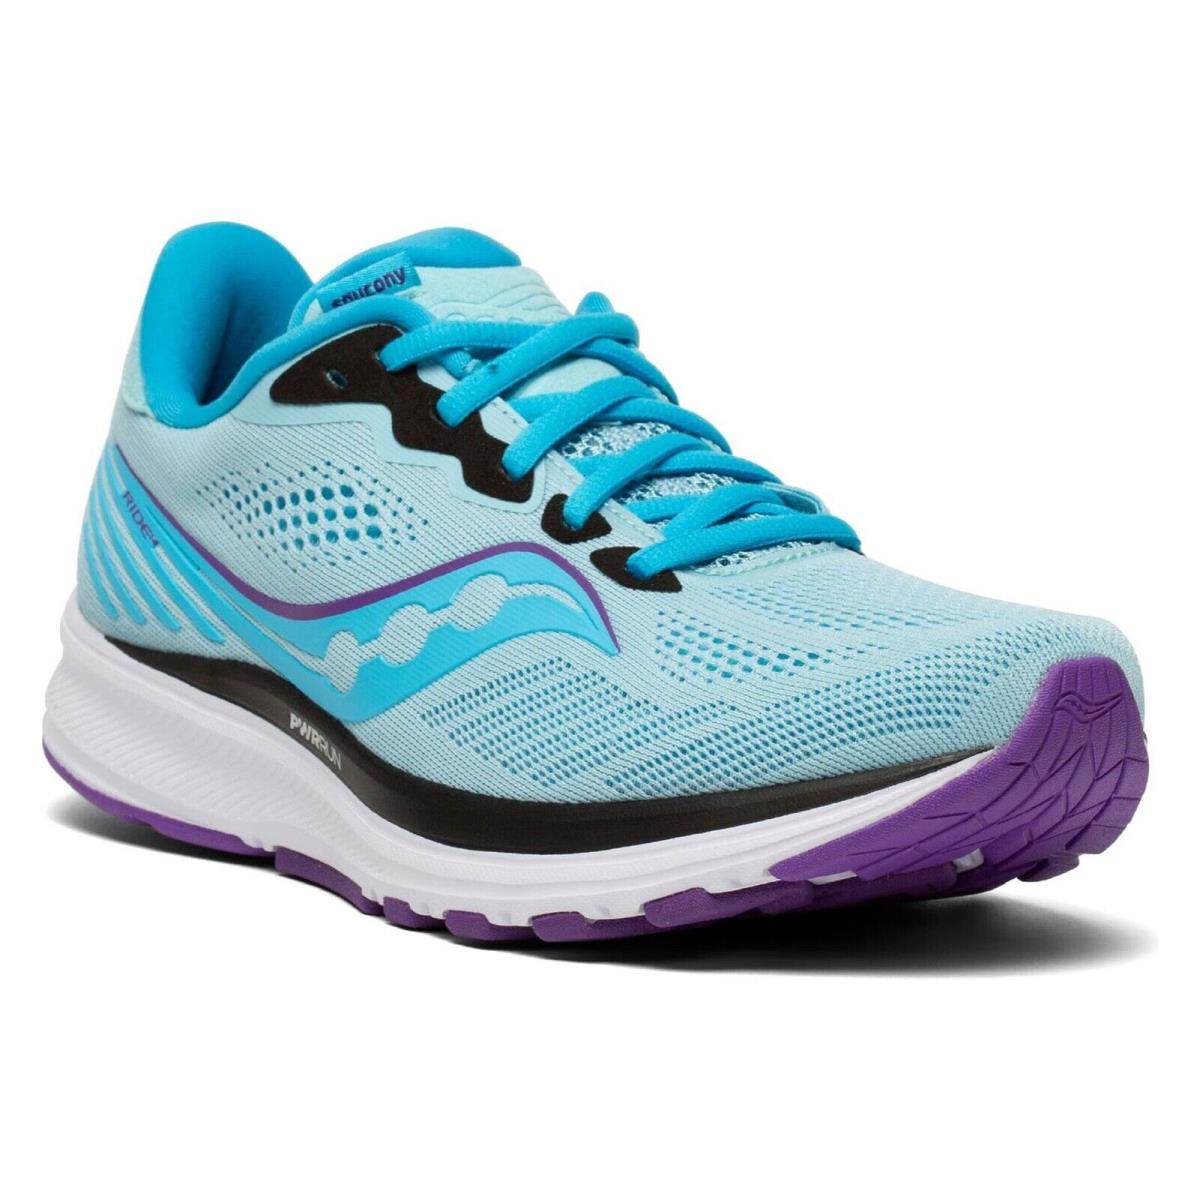 Wmns Saucony Ride 14 Powder Light Blue Concord Purple 11 S10650-20 Running Shoes